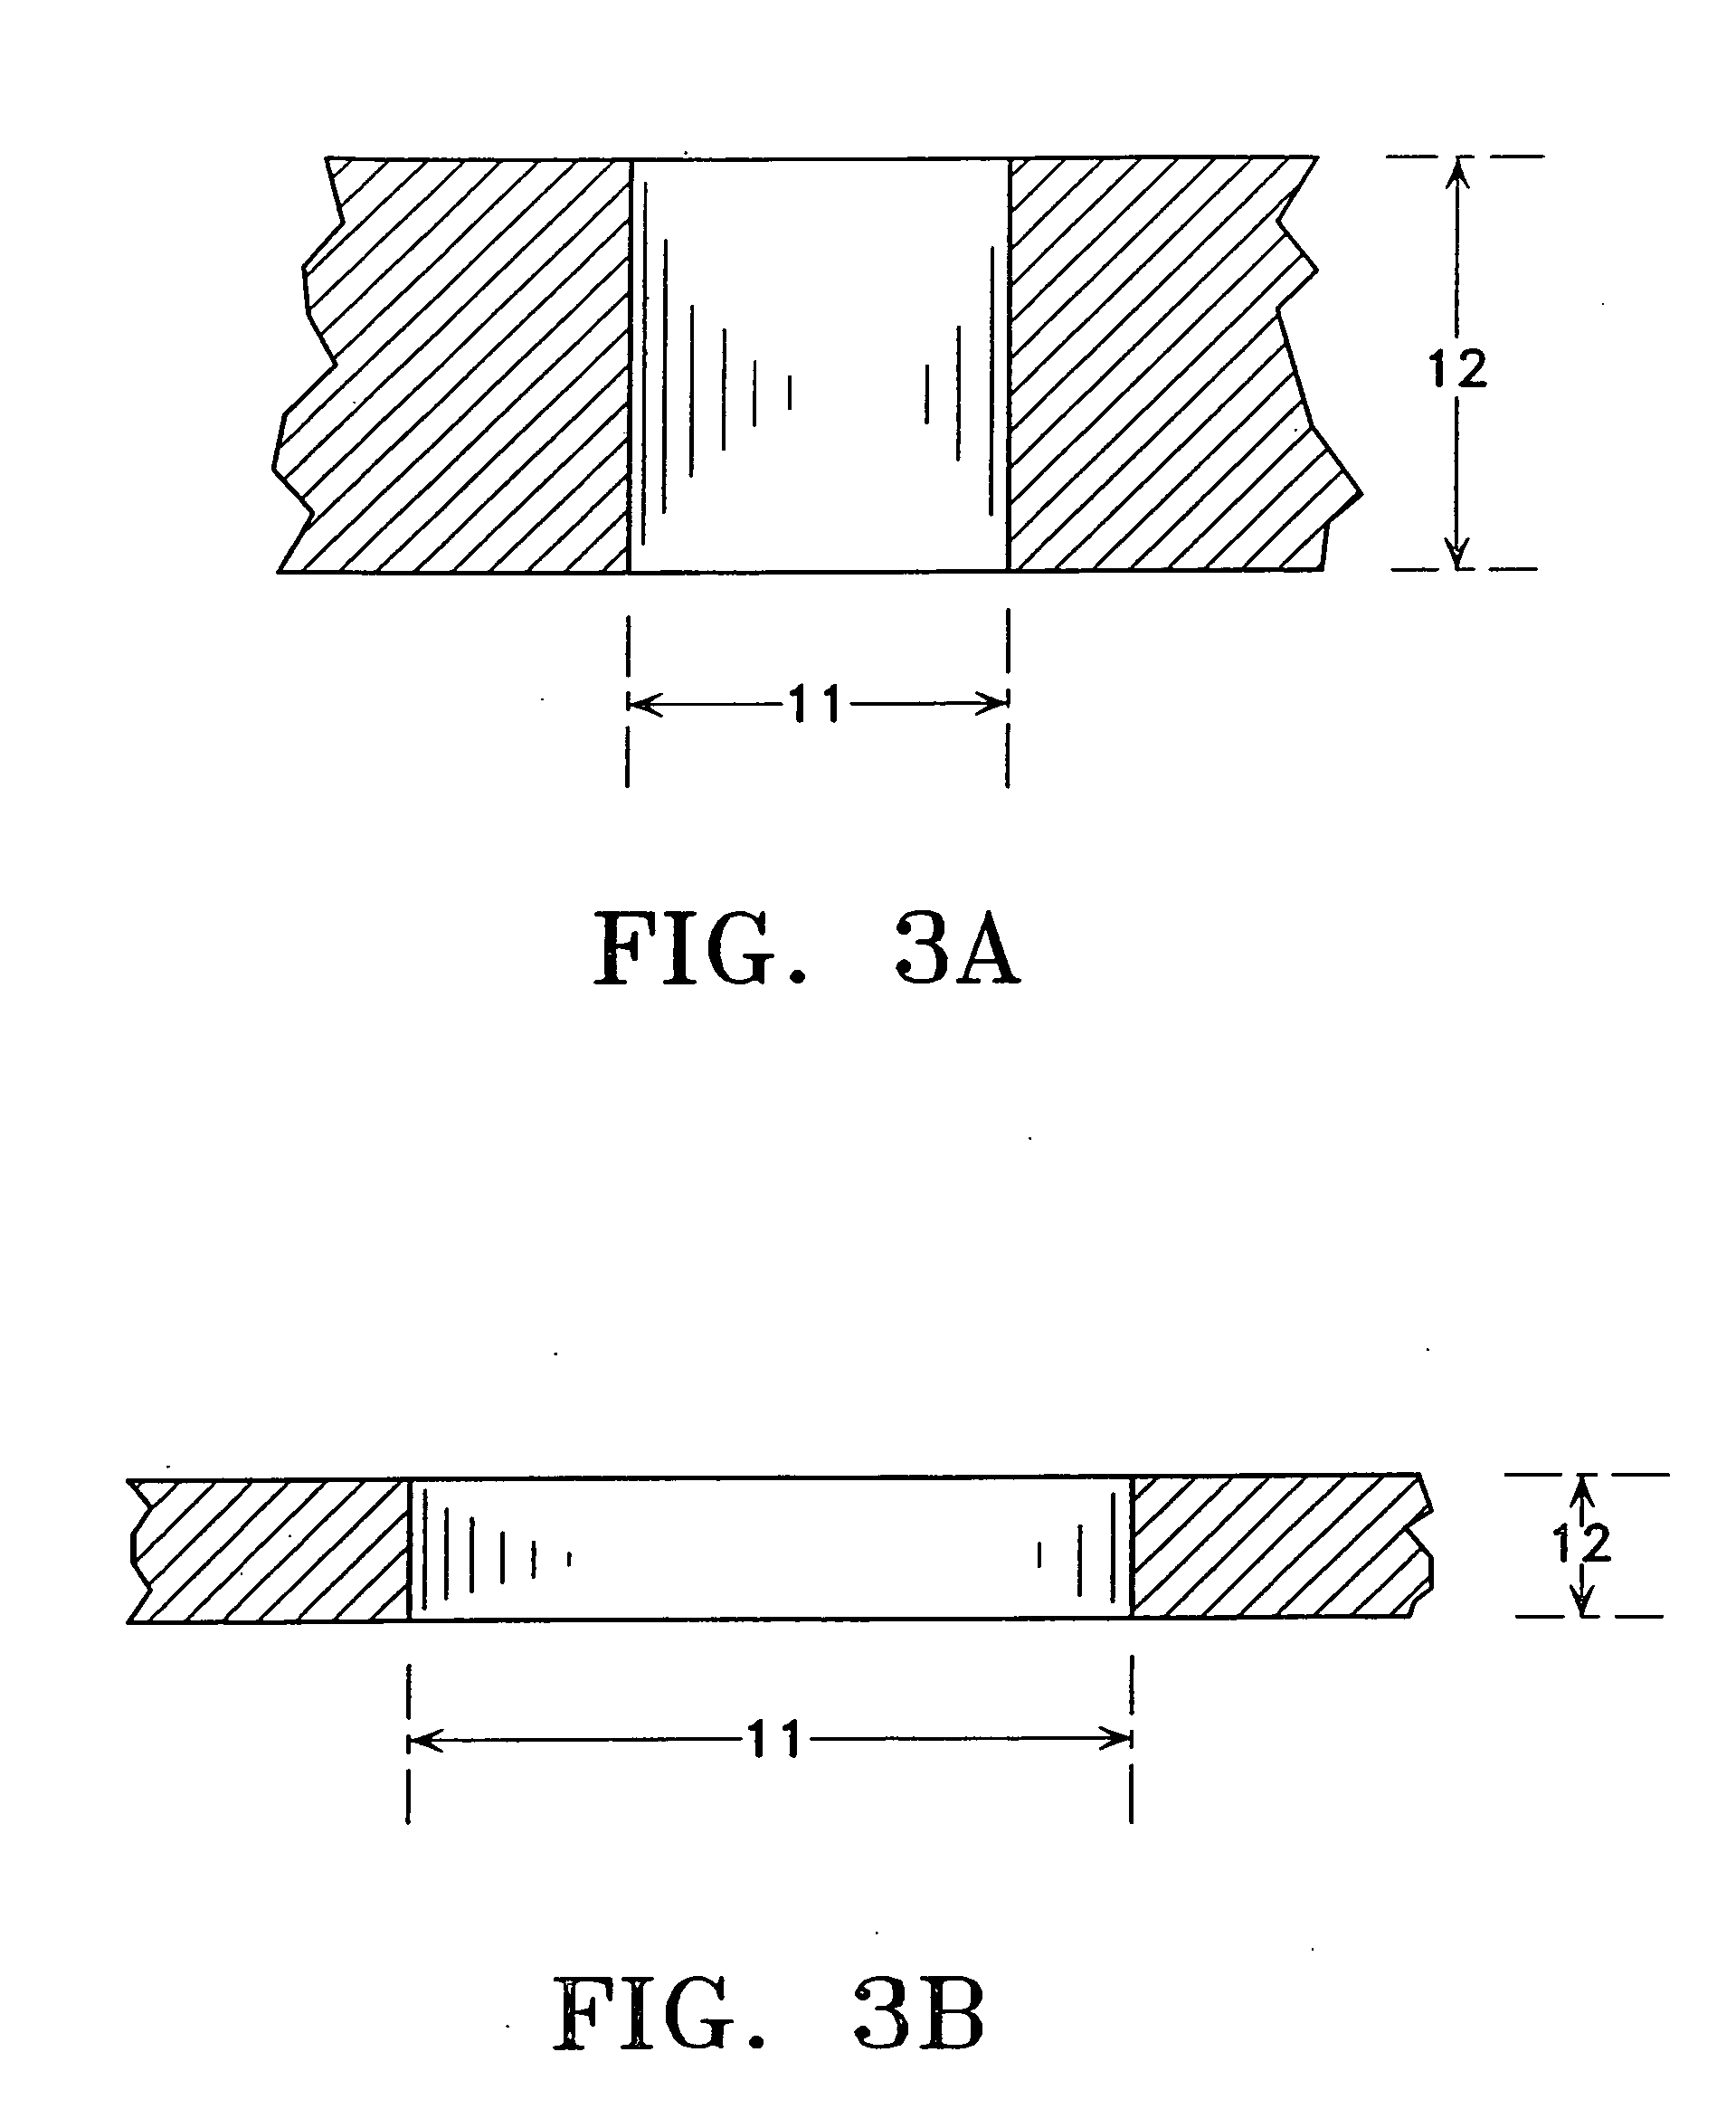 Apparatus and methods for parallel processing of micro-volume liquid reactions